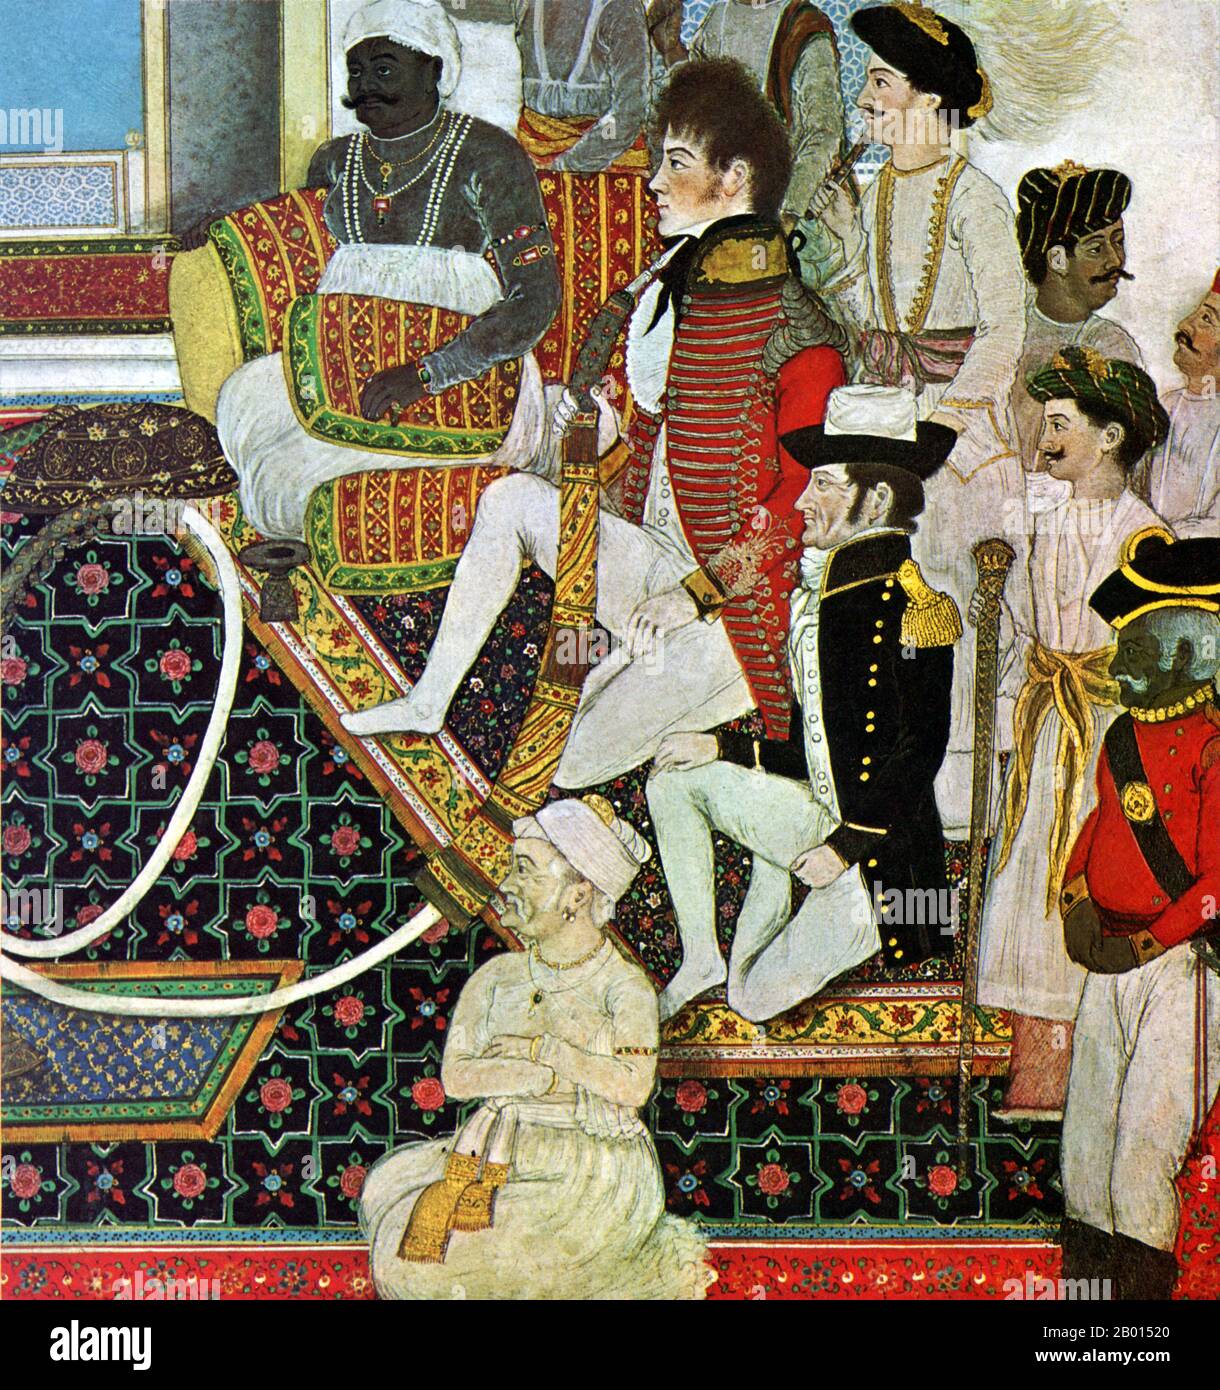 India: 'Prince Mahadaji Sindhia Etertaining Two British Officers with a Nautch'. Gouache on paper painting, c. 1820.  Soon after the defeat of the Spanish Armada in 1588, a group of London merchants presented a petition to Queen Elizabeth I for permission to sail to the Indian Ocean. Despite early sailing disasters, the East India Company was formed in 1600. It became the British East India Company after the Treaty of Union in 1707. It was a joint-stock company that was formed initially for pursuing trade with the East Indies, but that ended up trading mainly with the Indian subcontinent. Stock Photo